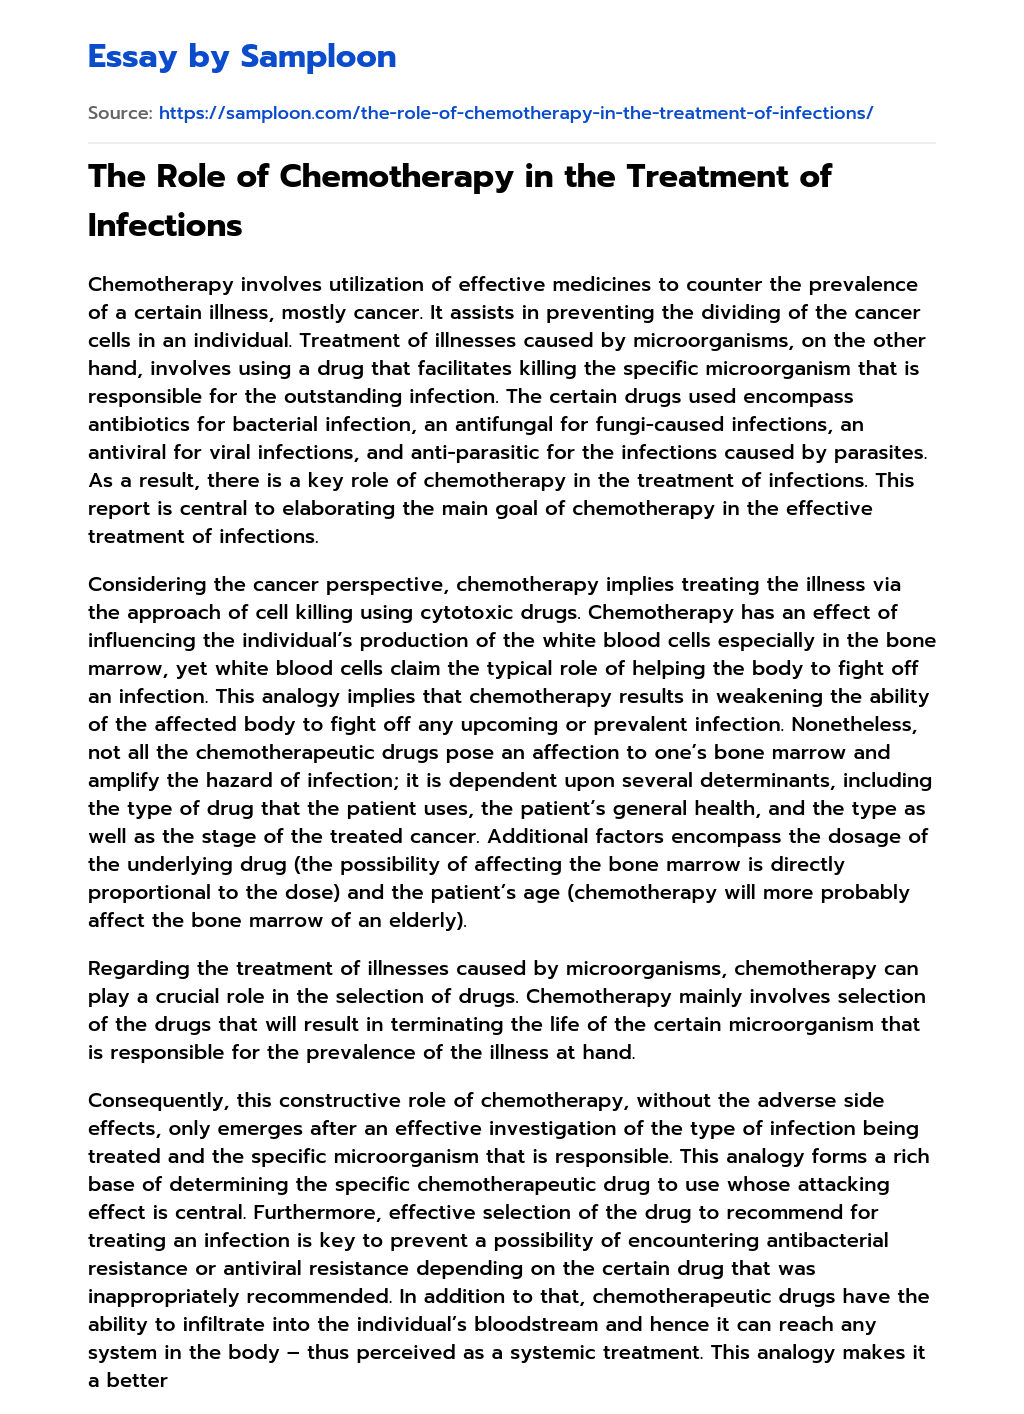 The Role of Chemotherapy in the Treatment of Infections  essay